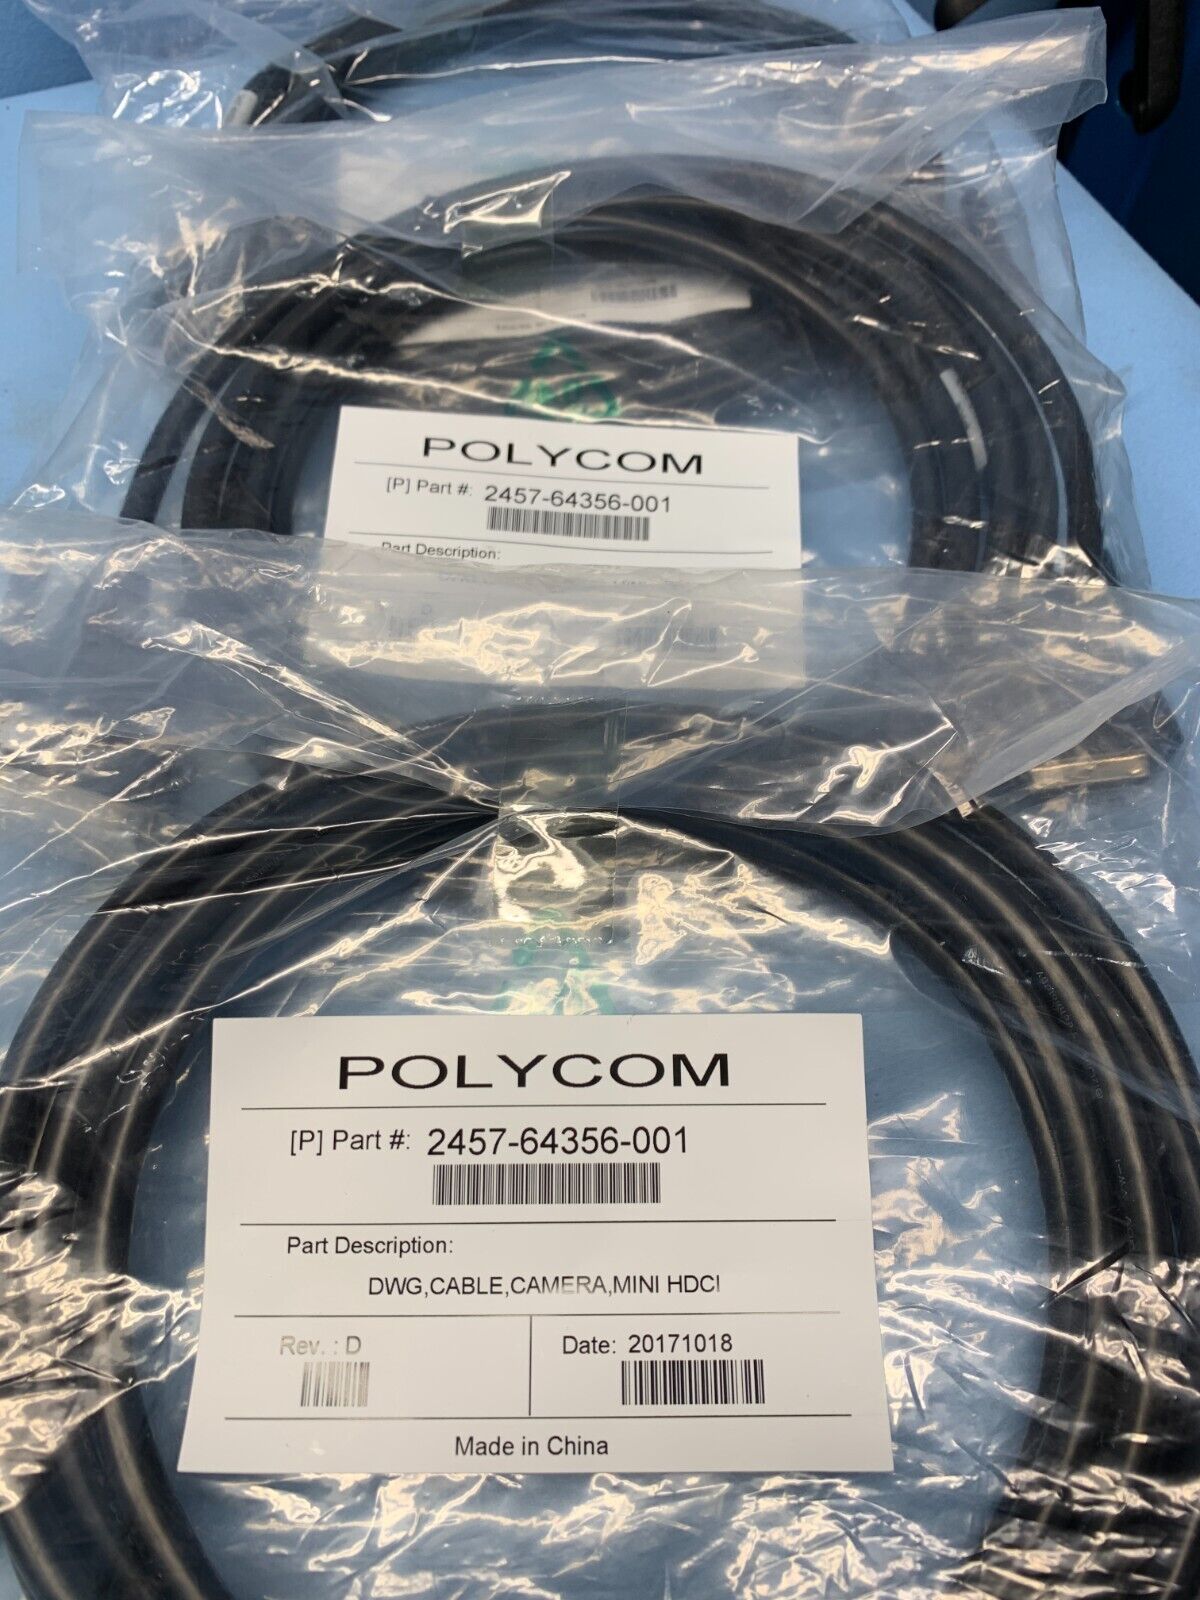 Polycom RealPresence Group Microphone and Camera Cables (LOT OF 8 CABLES)